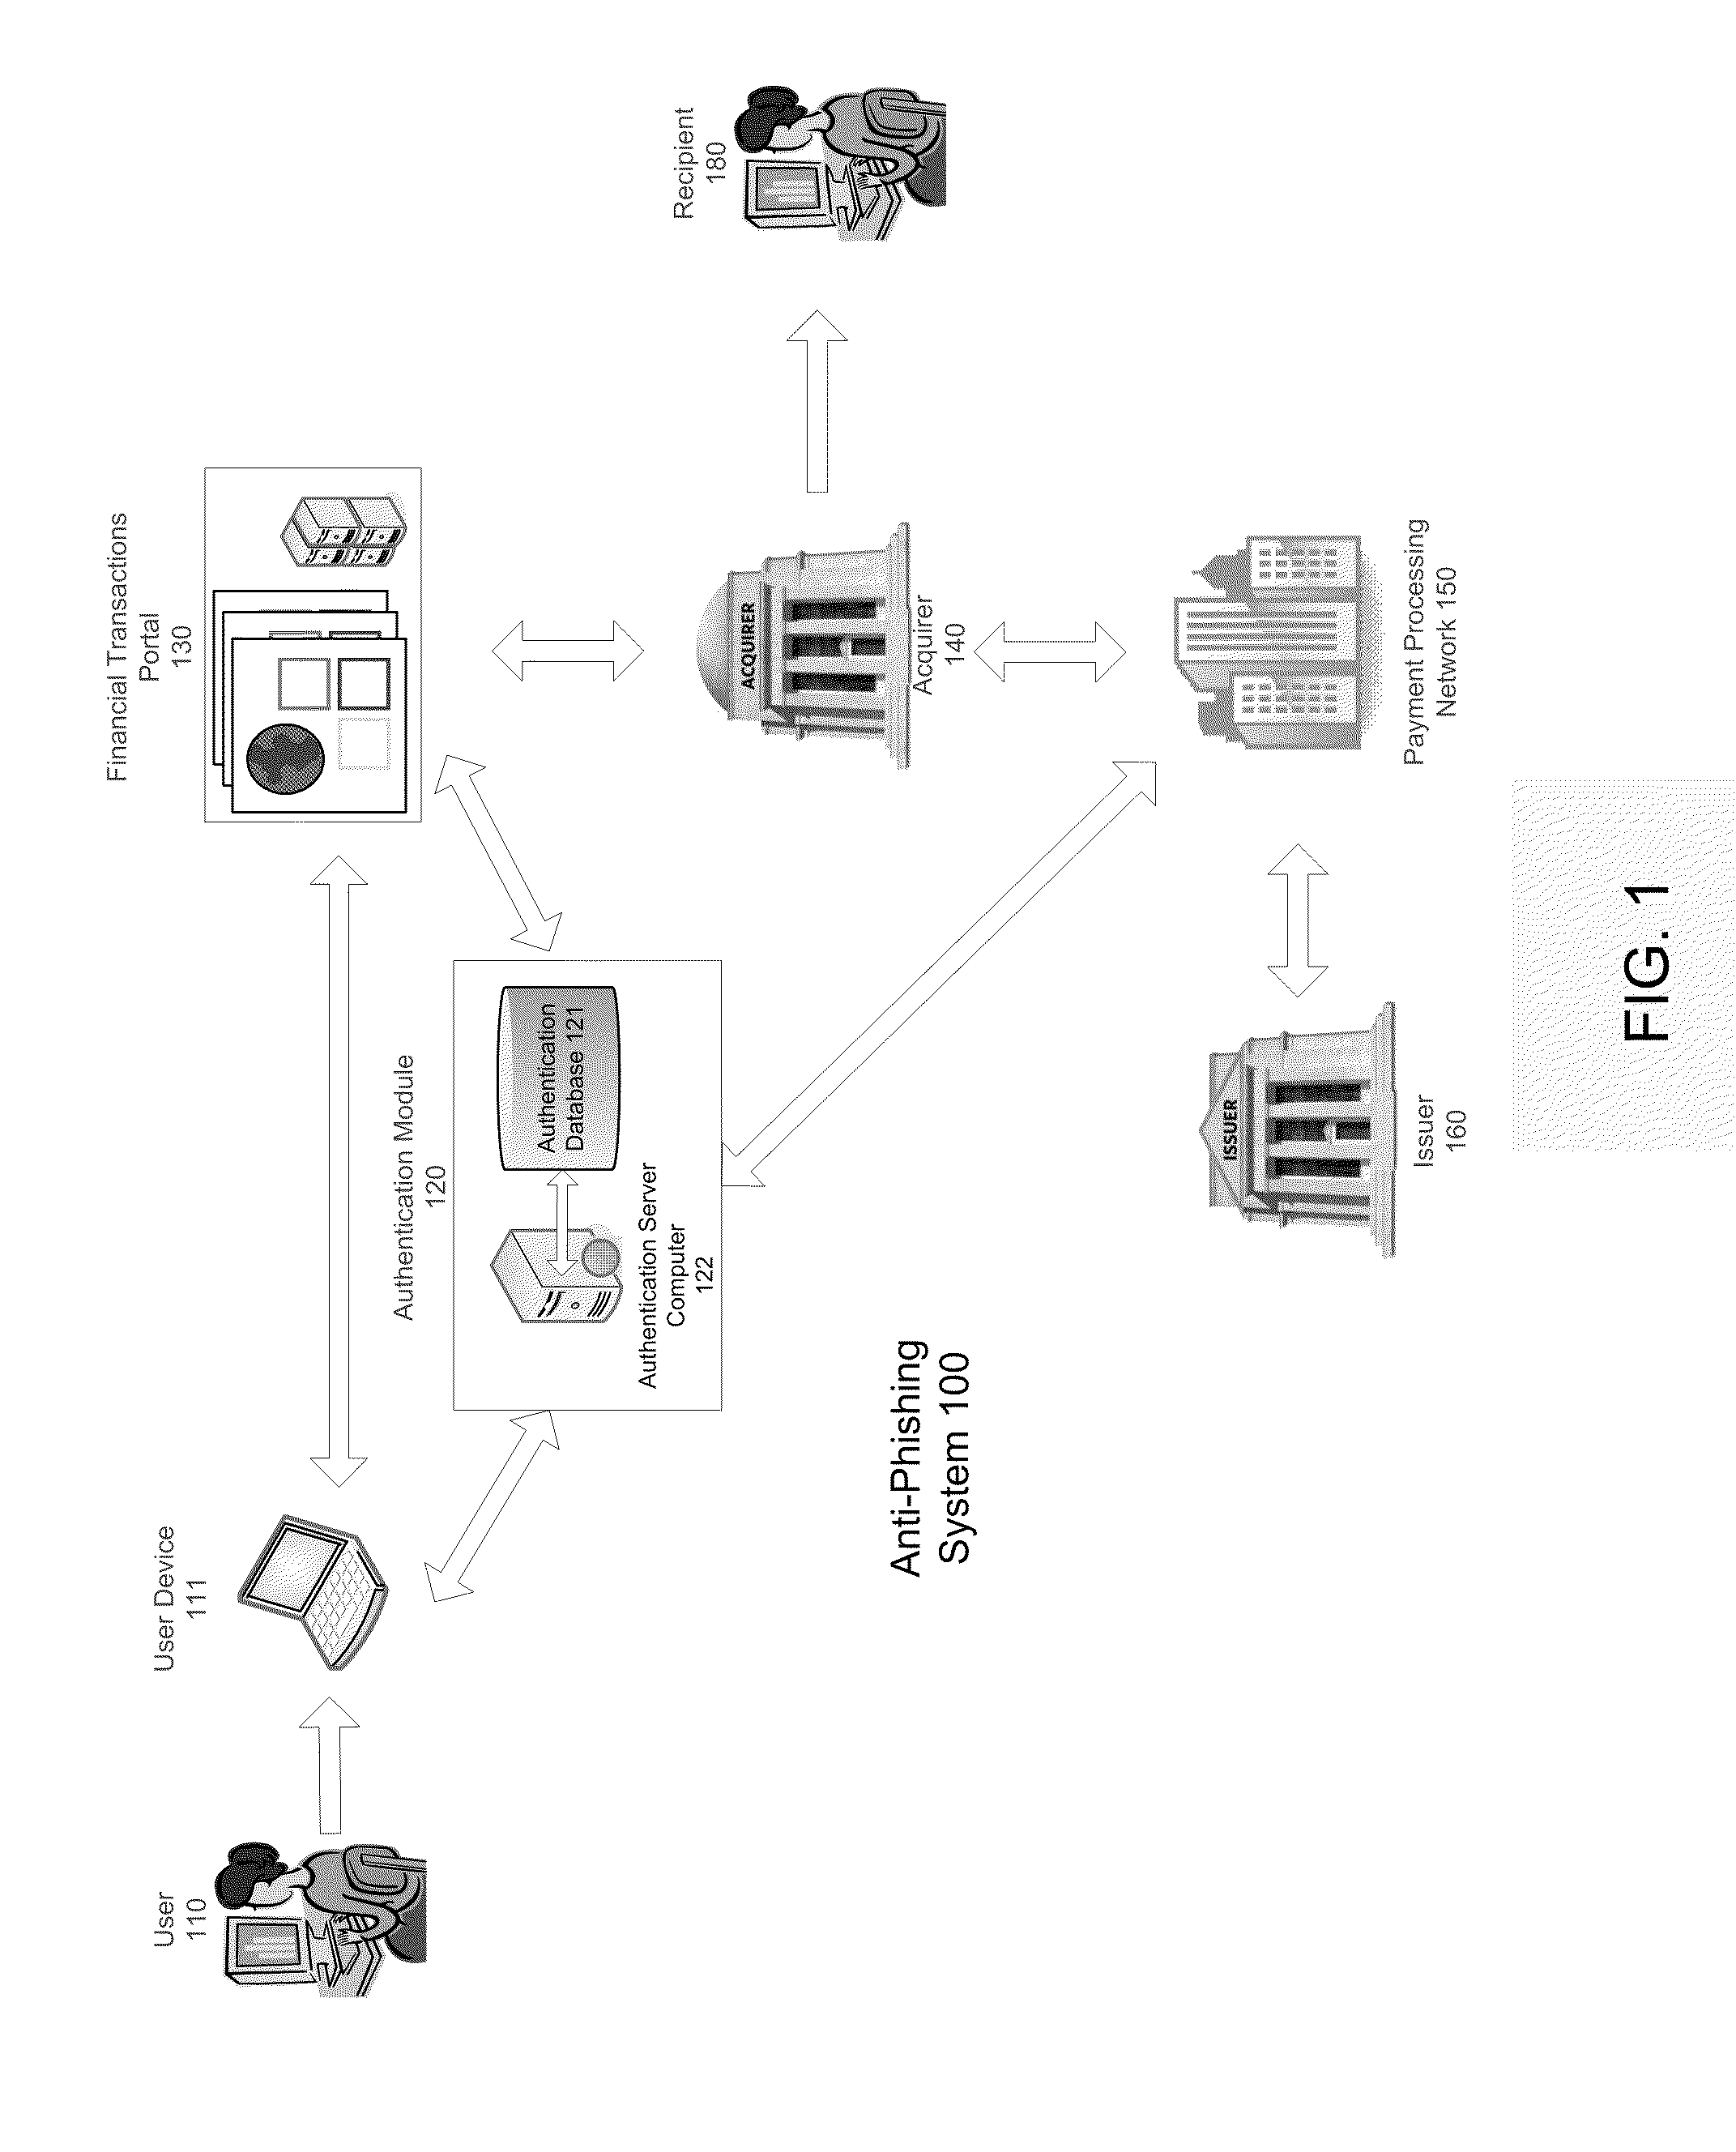 Anti-phishing system and method including list with user data